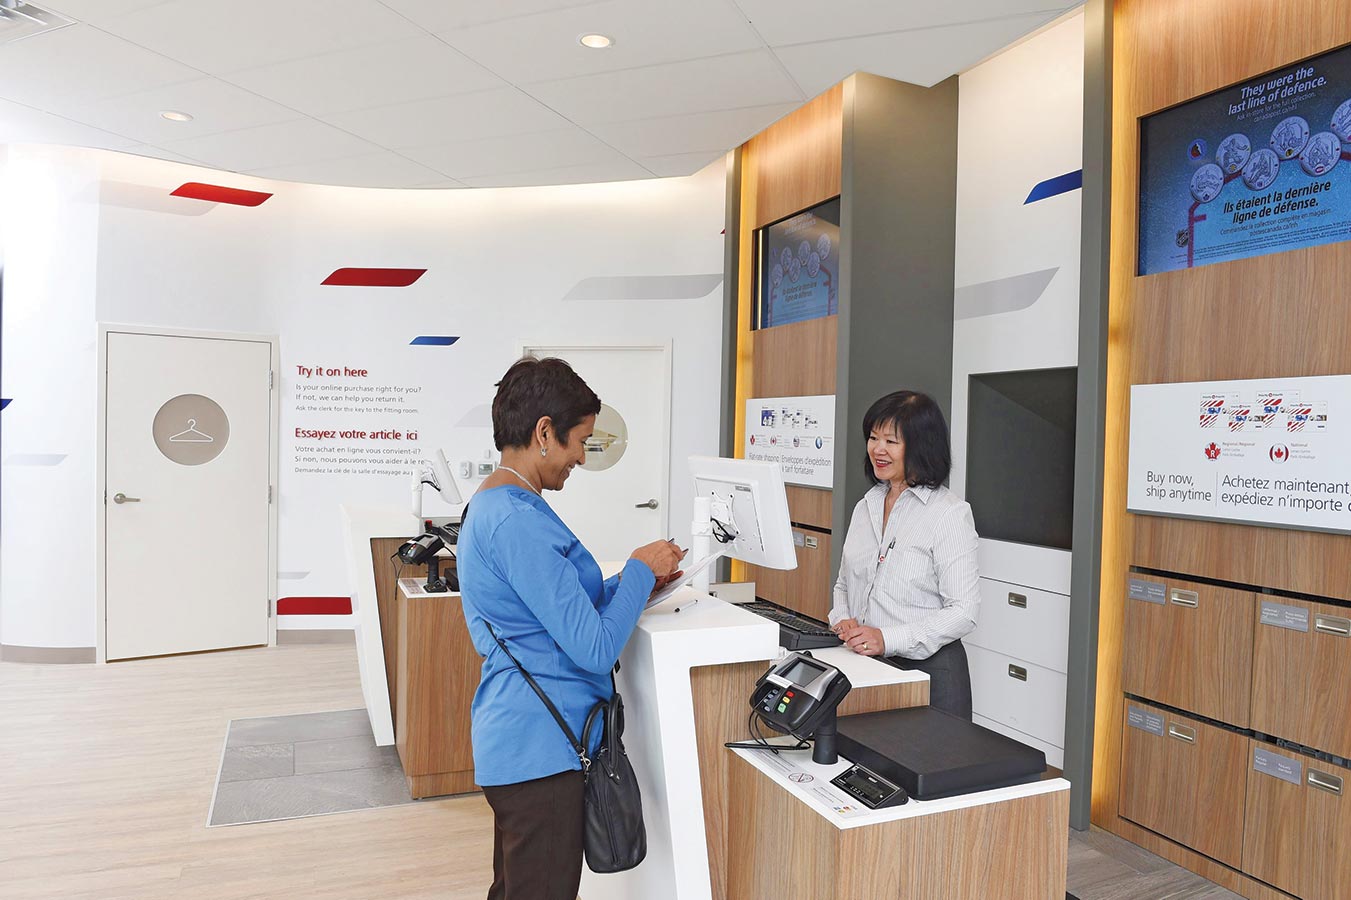 Canada Post retail employee assisting a customer at a post office counter